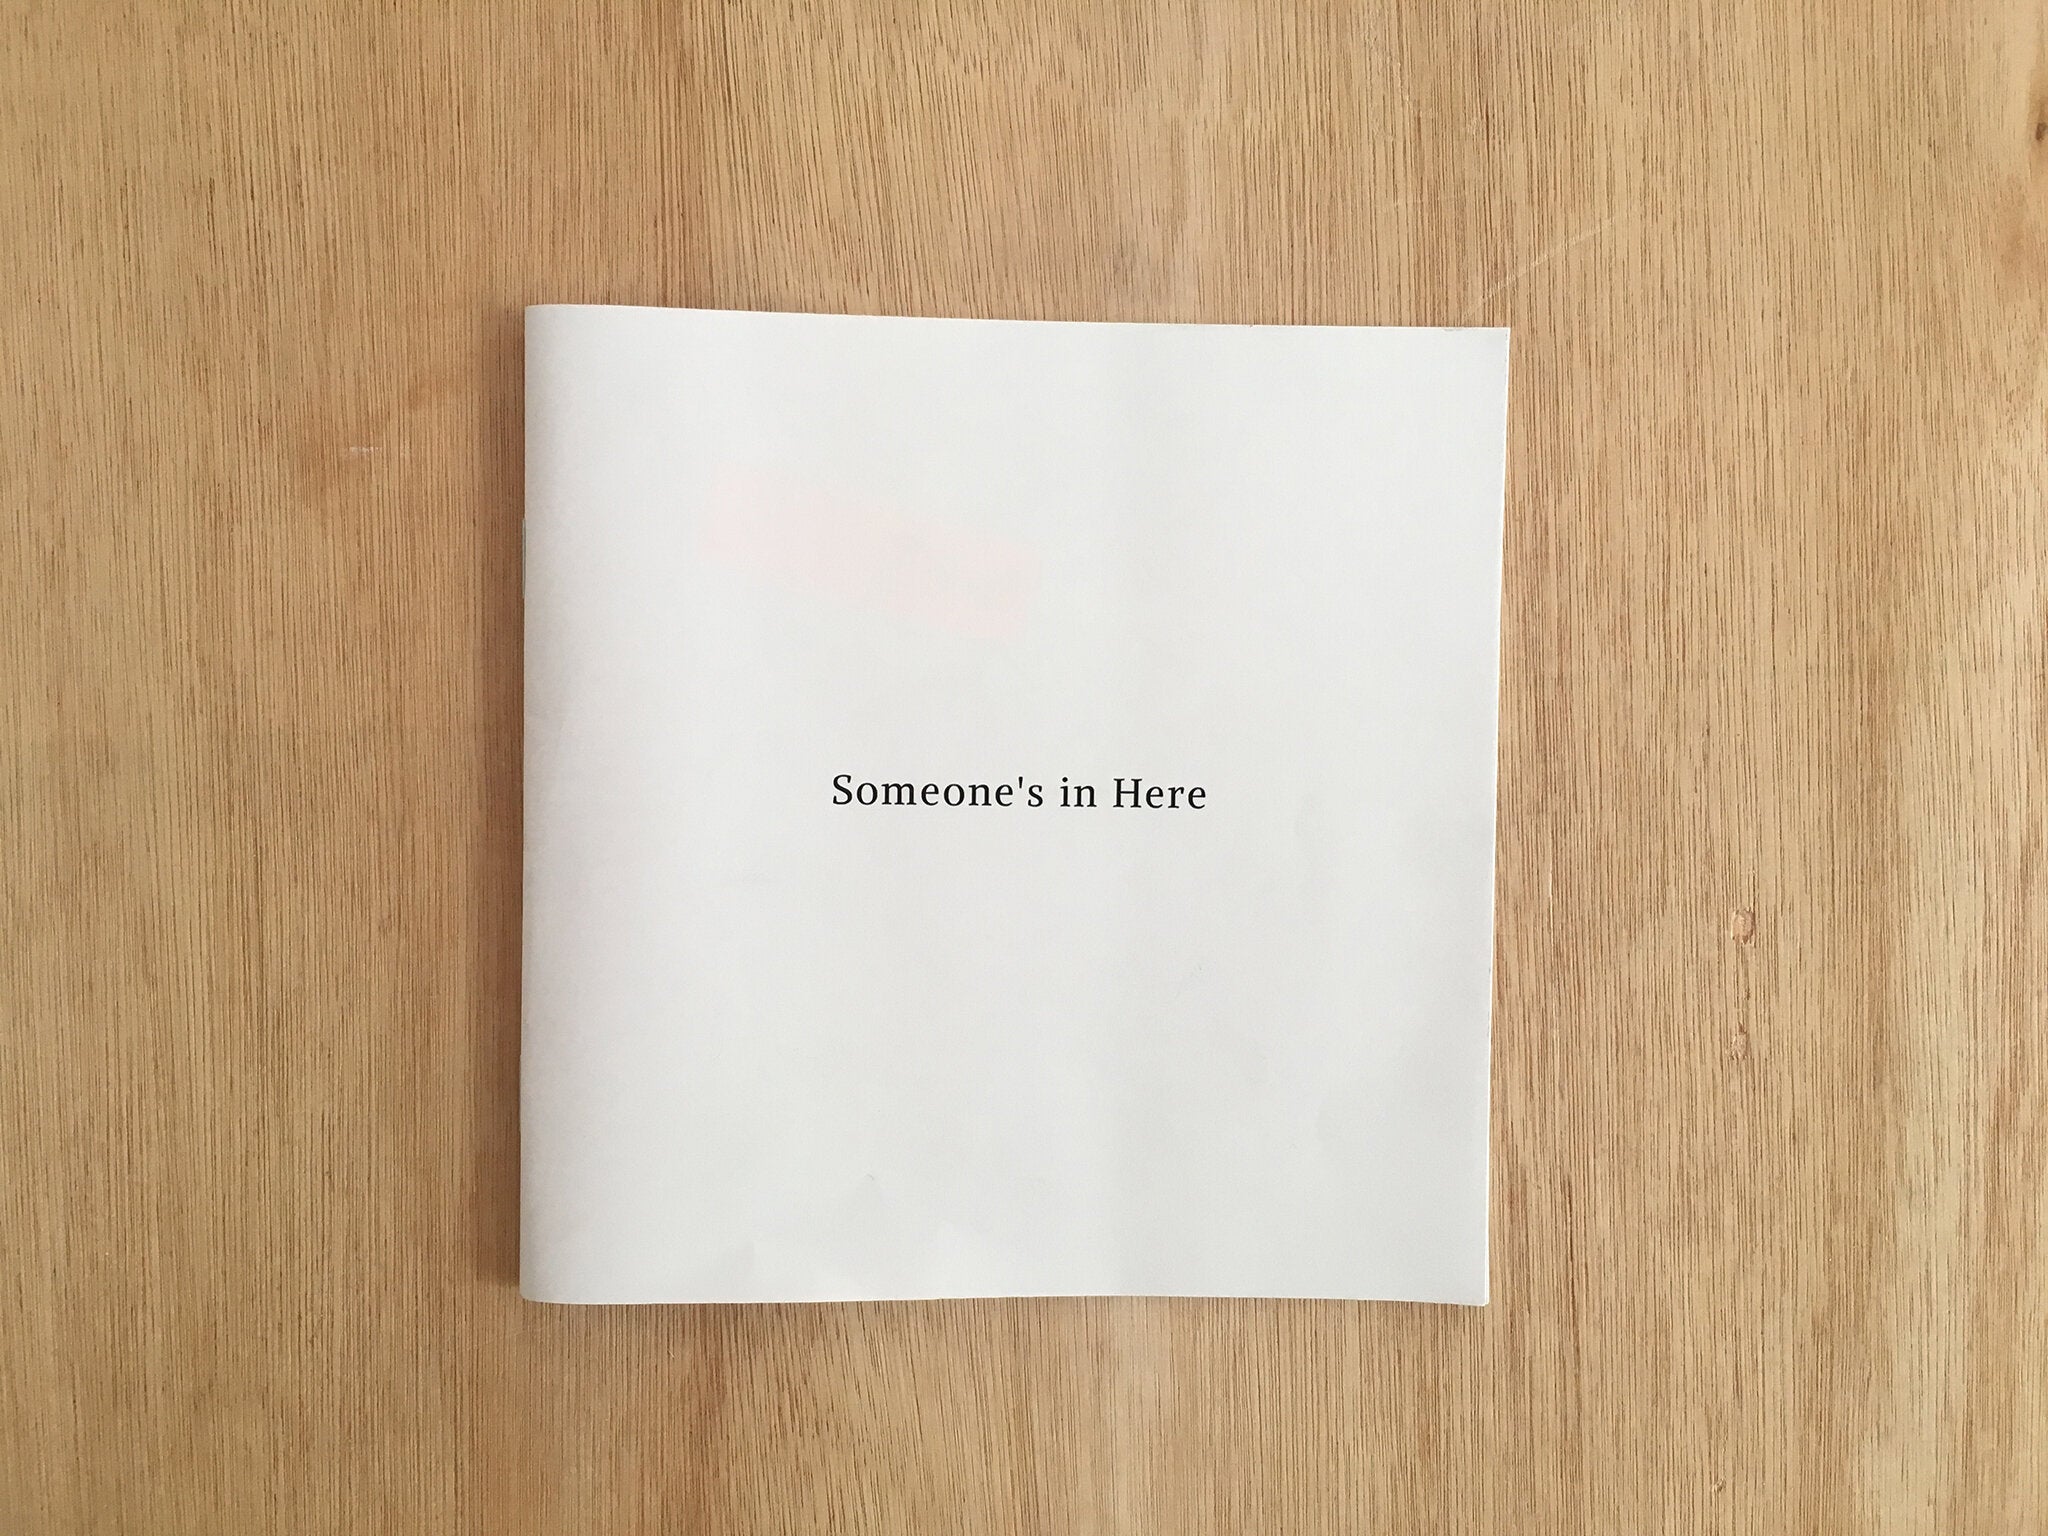 SOMEONE'S IN HERE by Sophie White